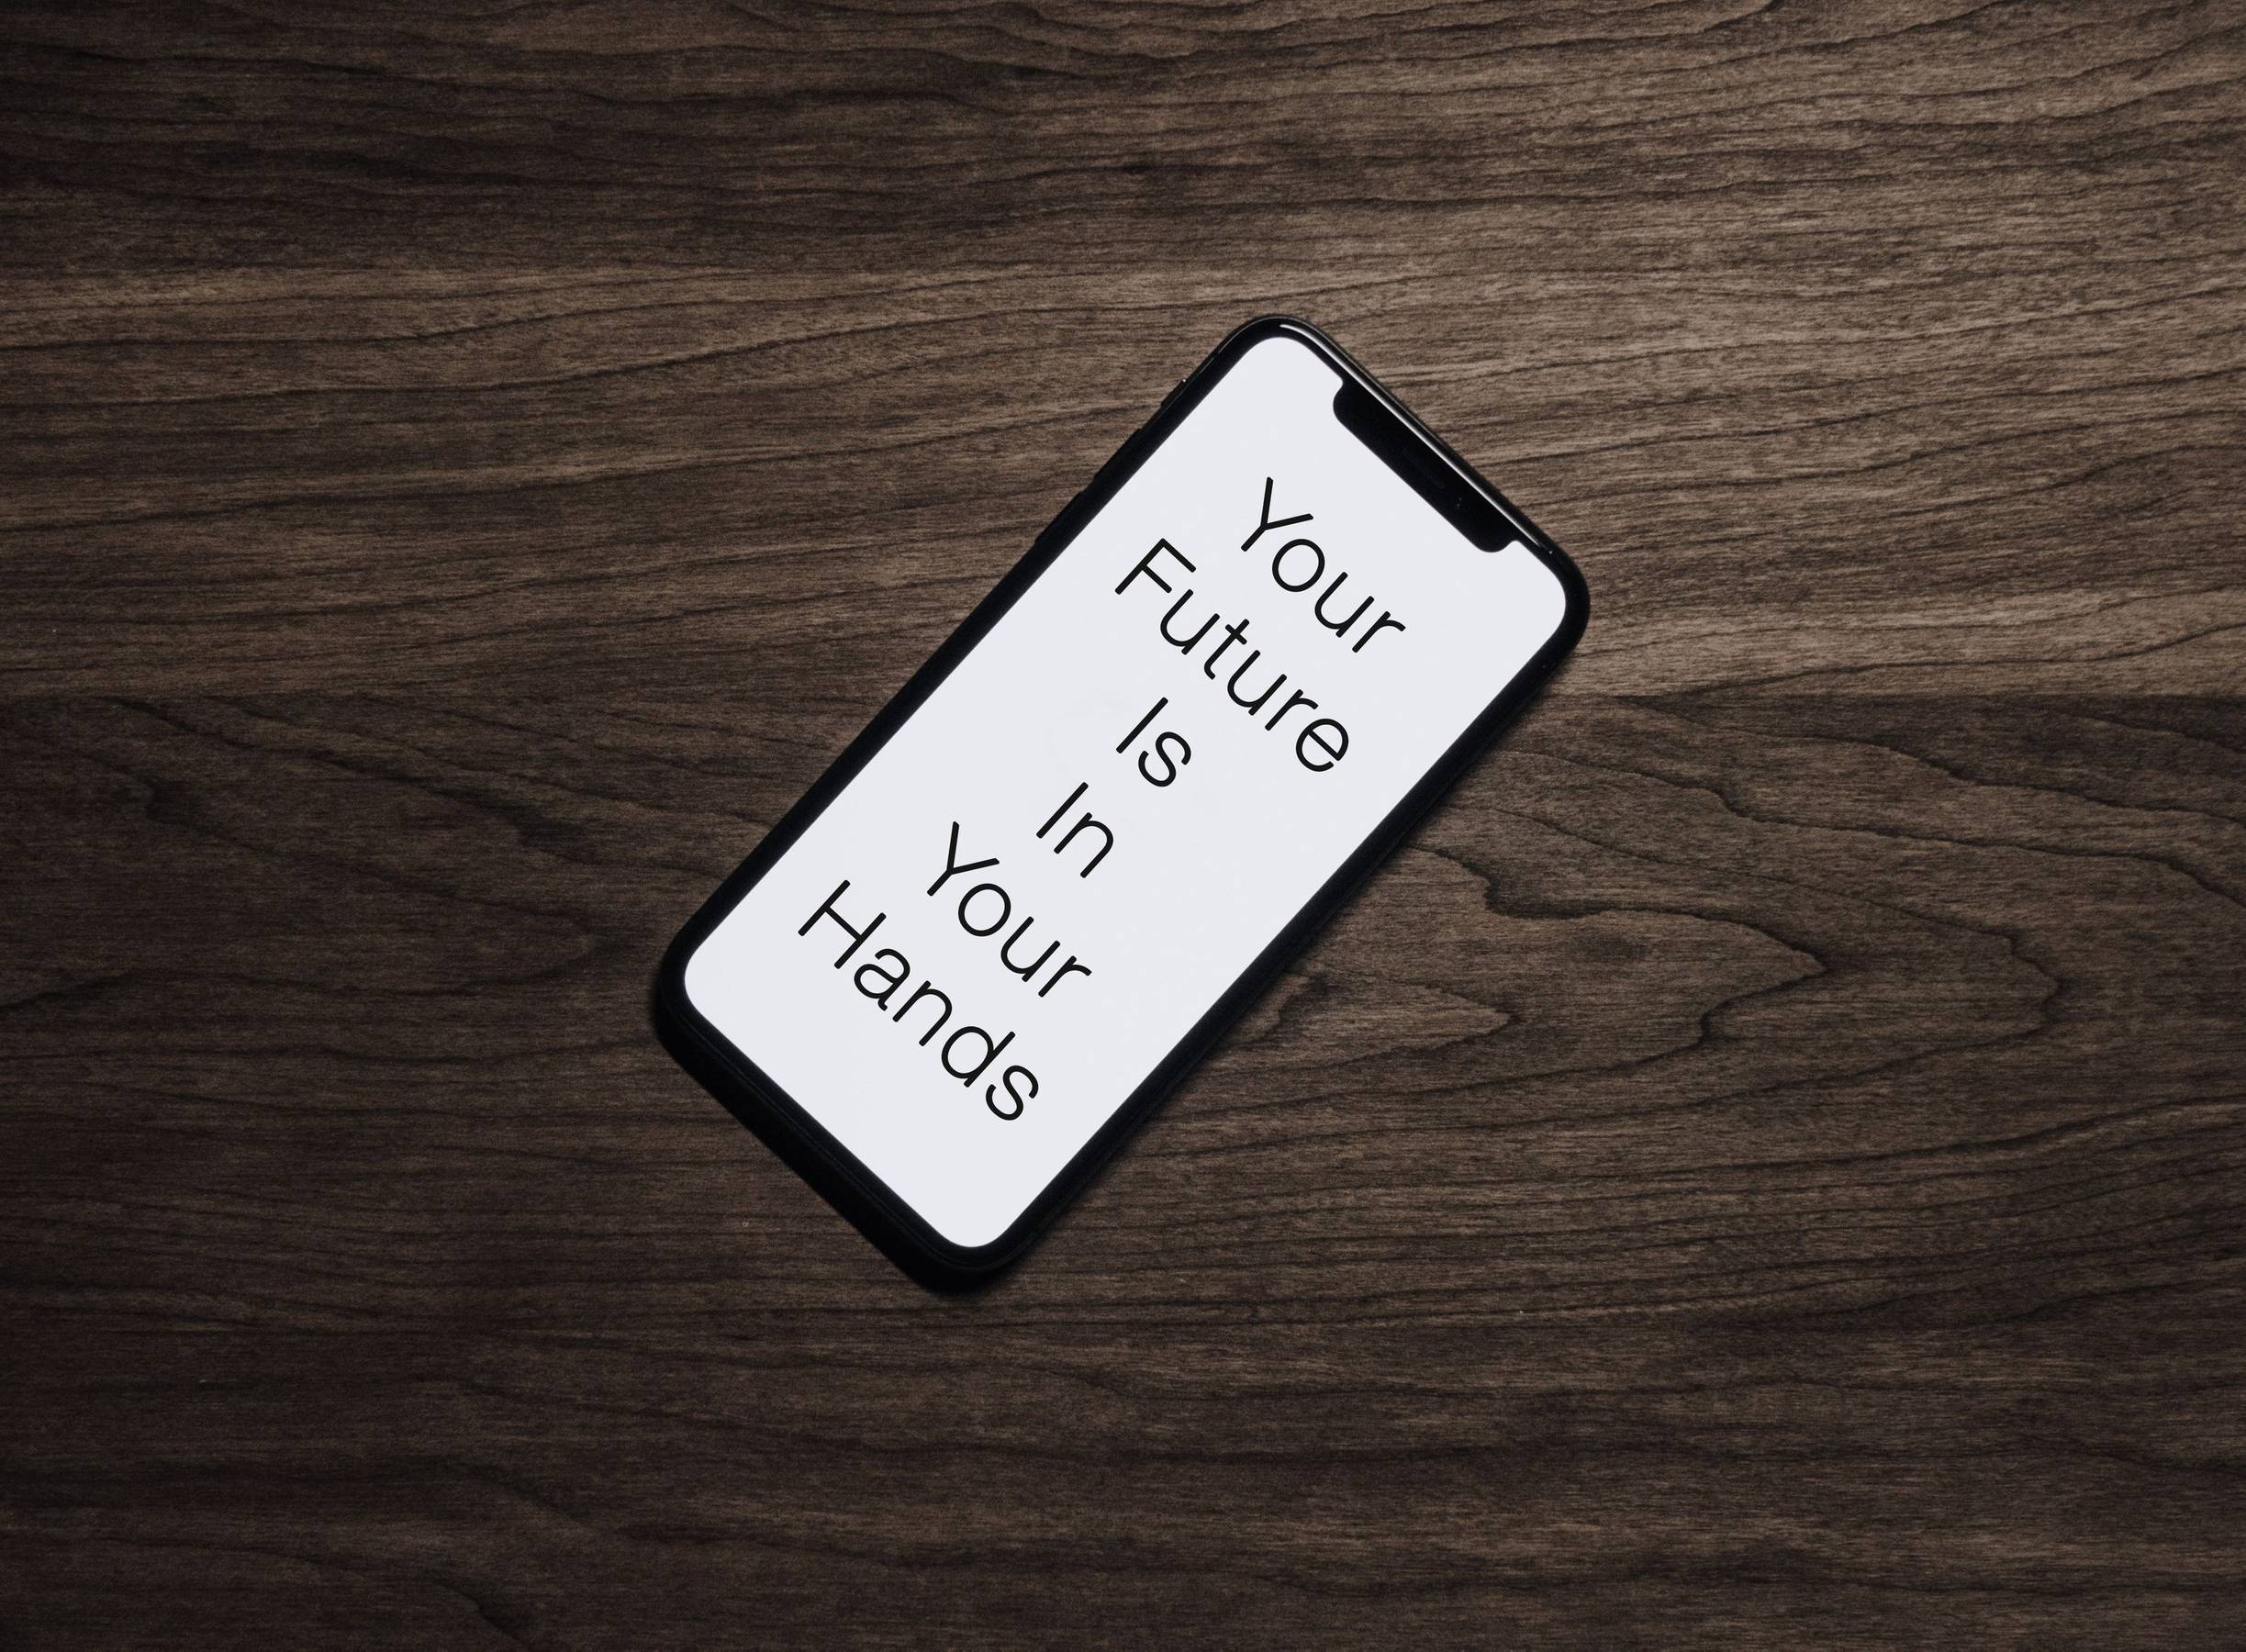 A smartphone with "Your Future Is In Your Hands" on the screen